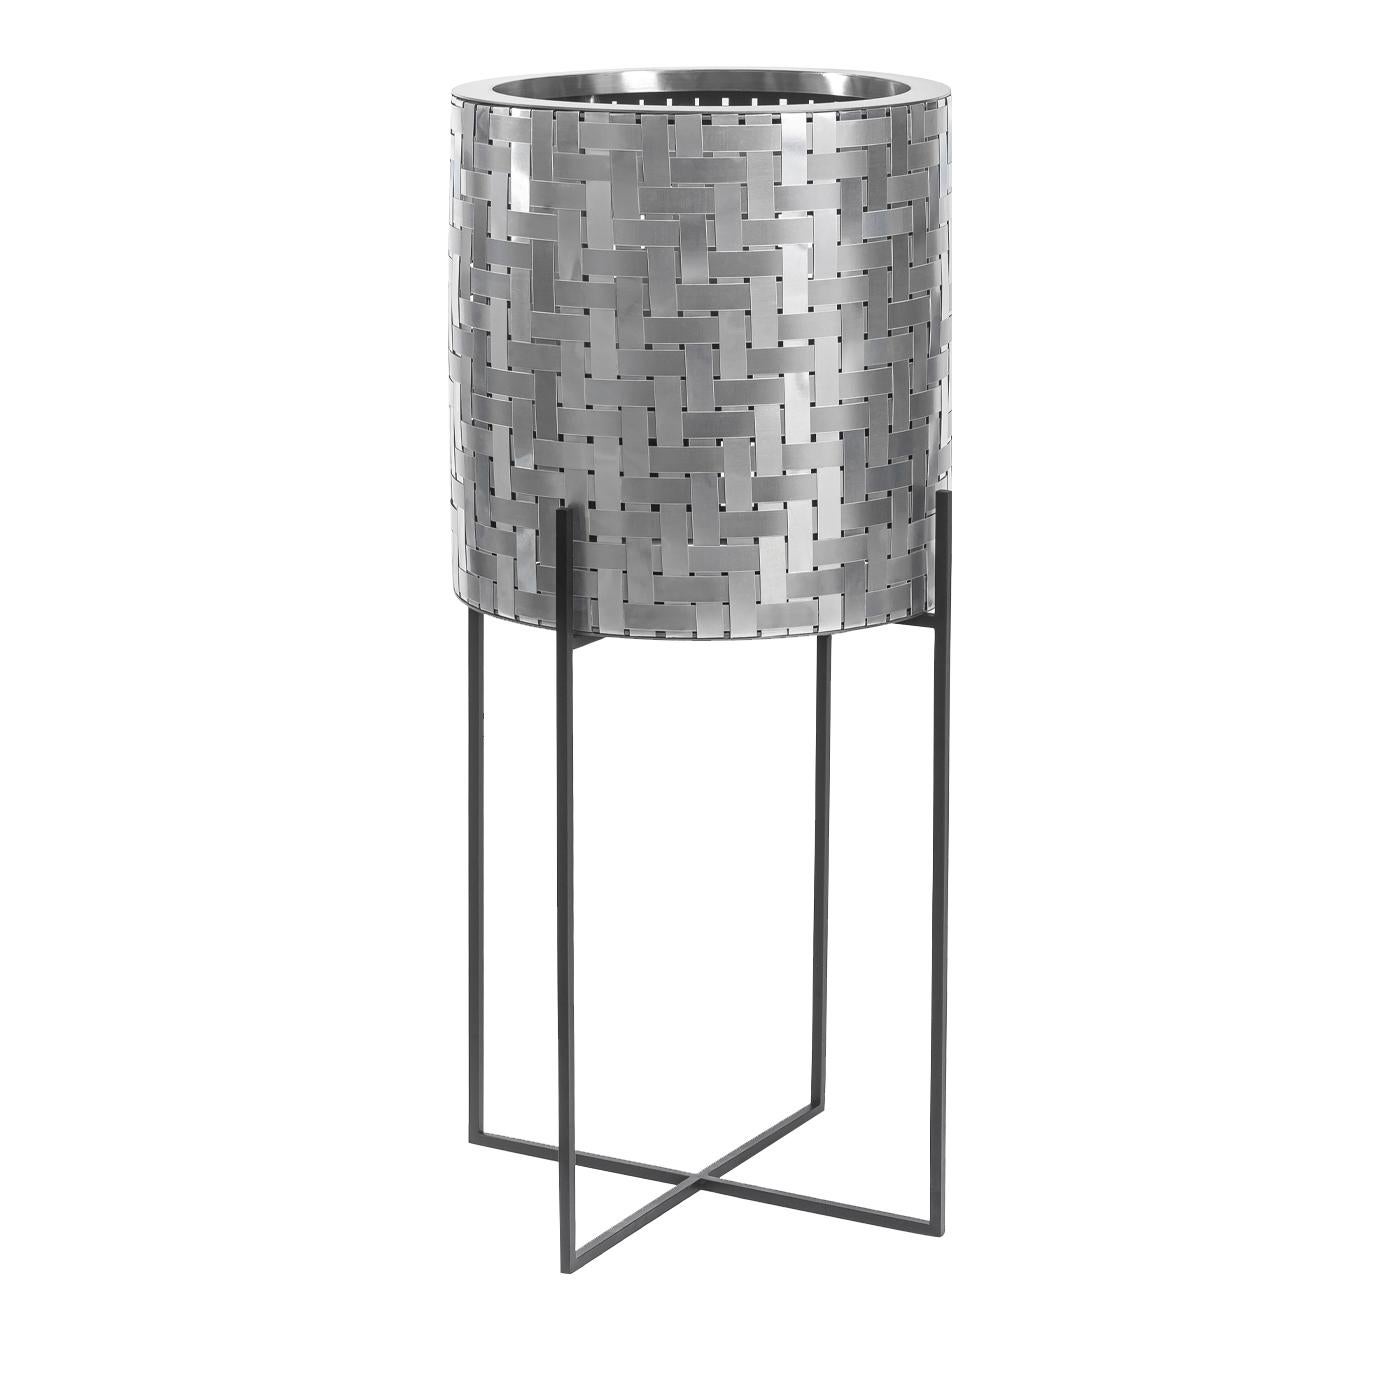 Nexum is a vase cover with an external structure in painted iron, designed to make it easier to care for your plants. Available in three different sizes, the Nexum60 is 60 cm high and sits approximately 50 cm off the ground. The internal steel